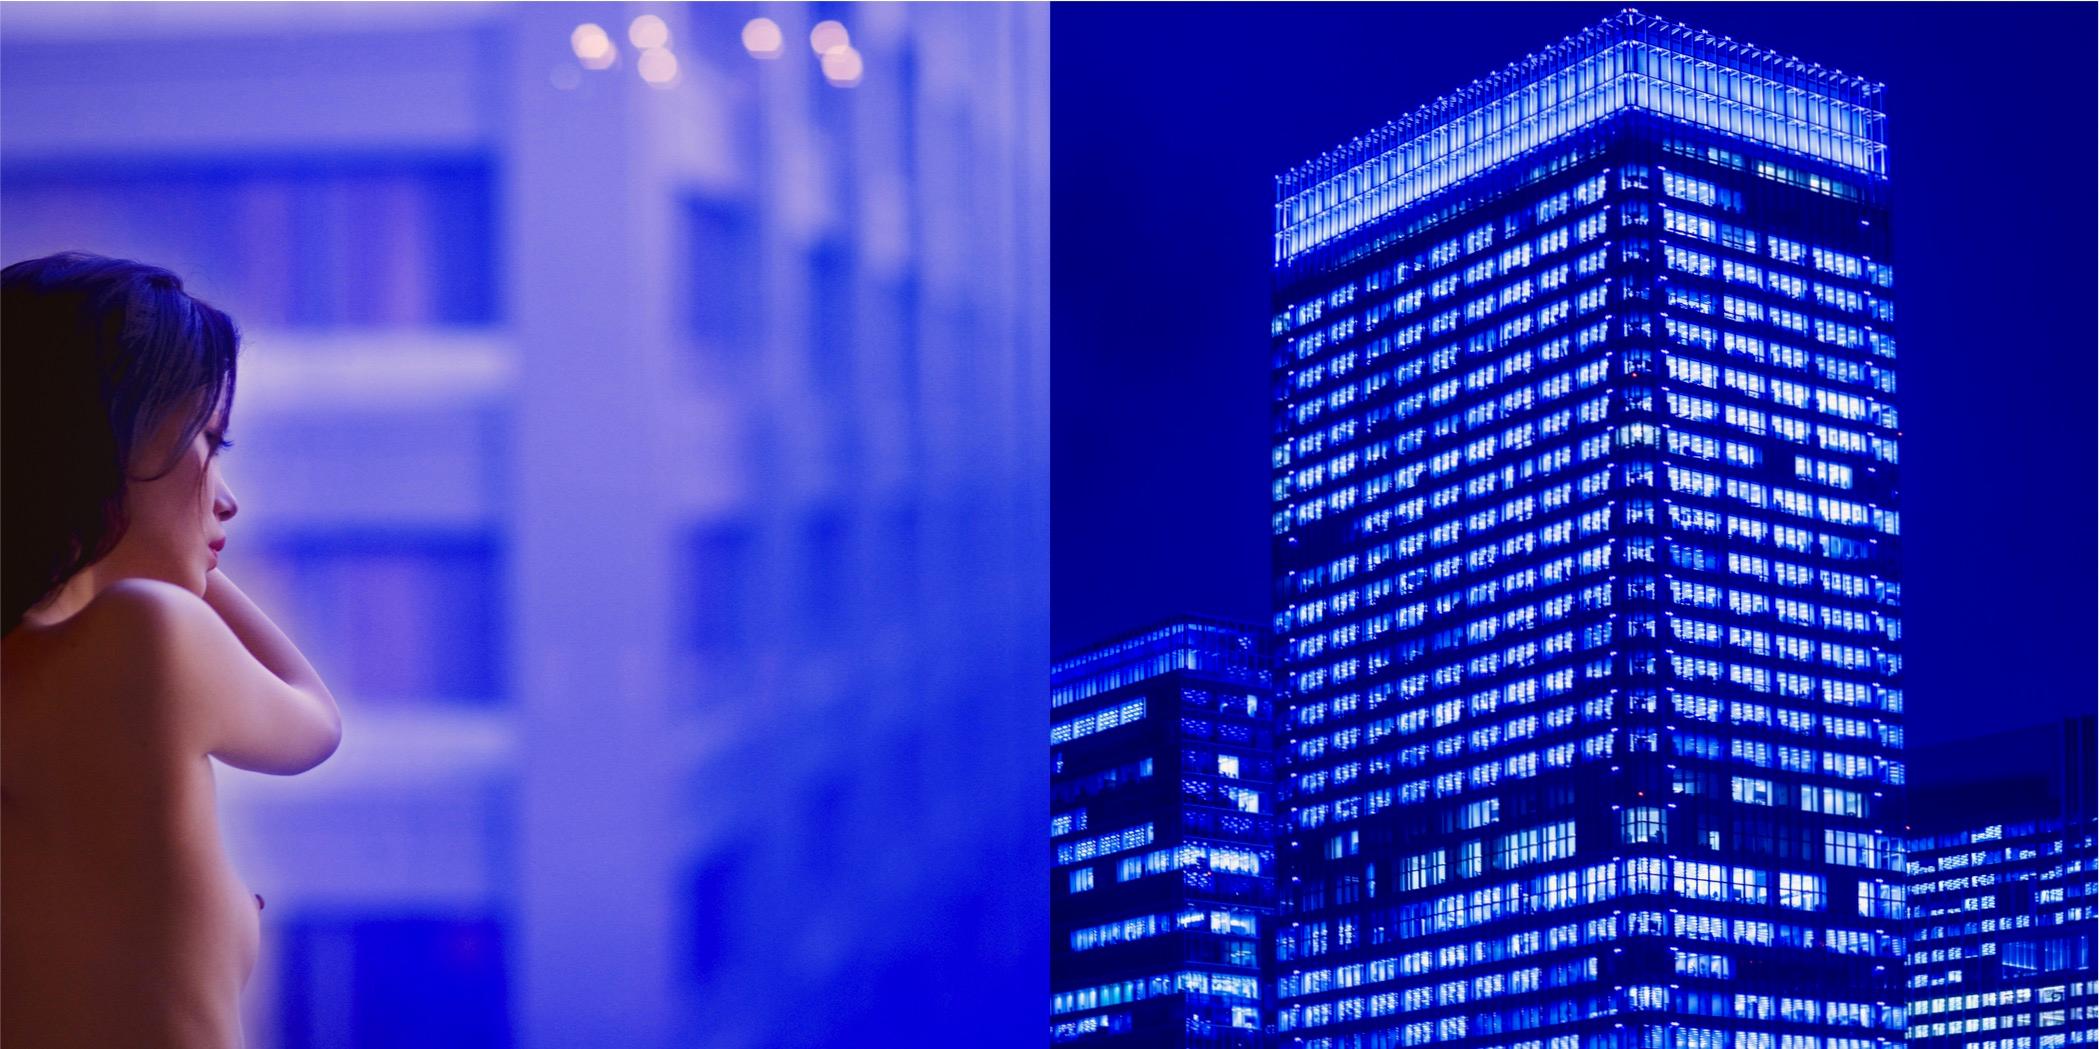 Guido Argentini Color Photograph - Thoughts across the sky - diptych of a nude model and skyscrapers in blue shades